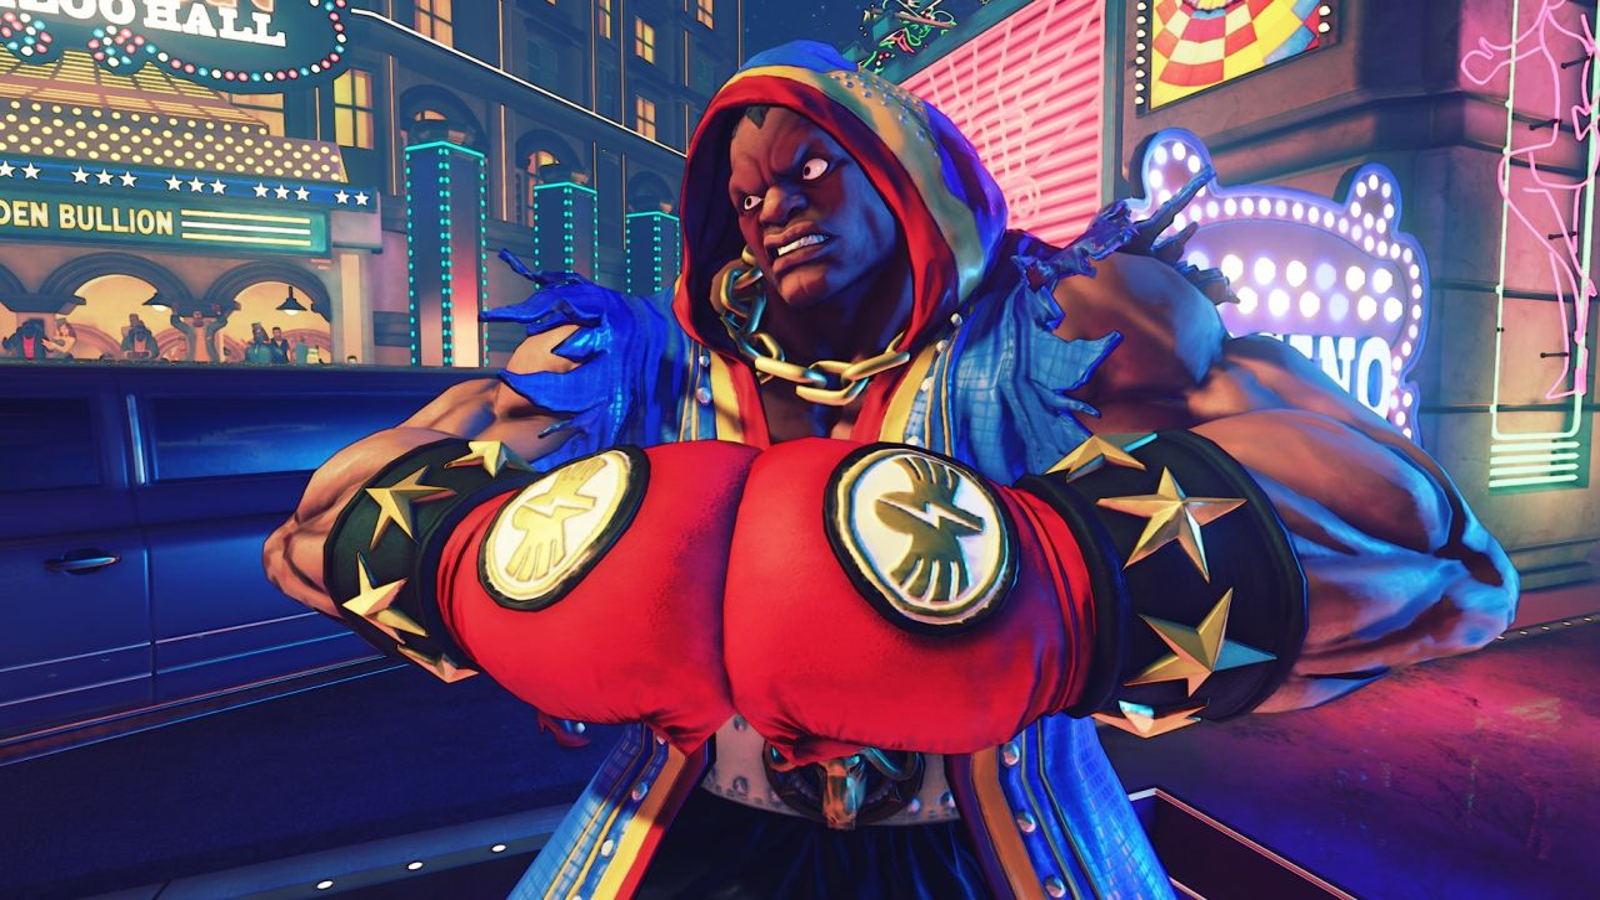 Is Street Fighter 6 for casuals or experts?